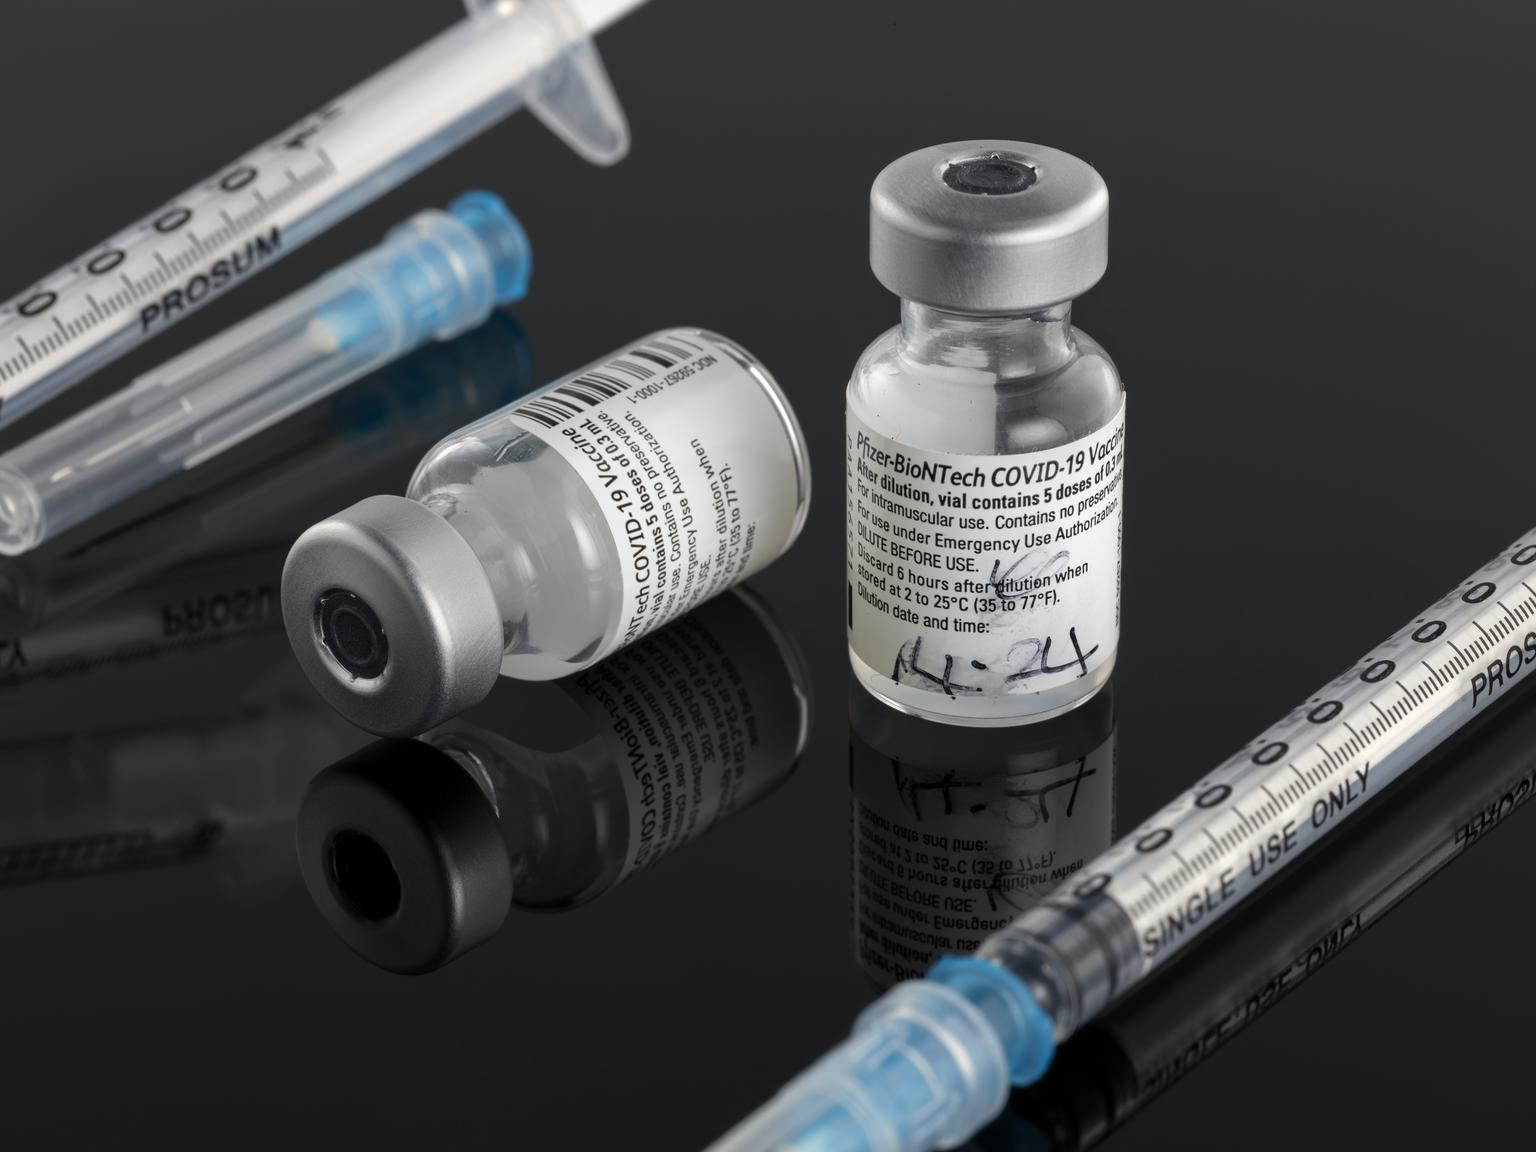 Glass vial that held Margaret Keenan’s first Pfizer-BioNTech COVID-19 vaccine, 7th December 2020 (glass vial)